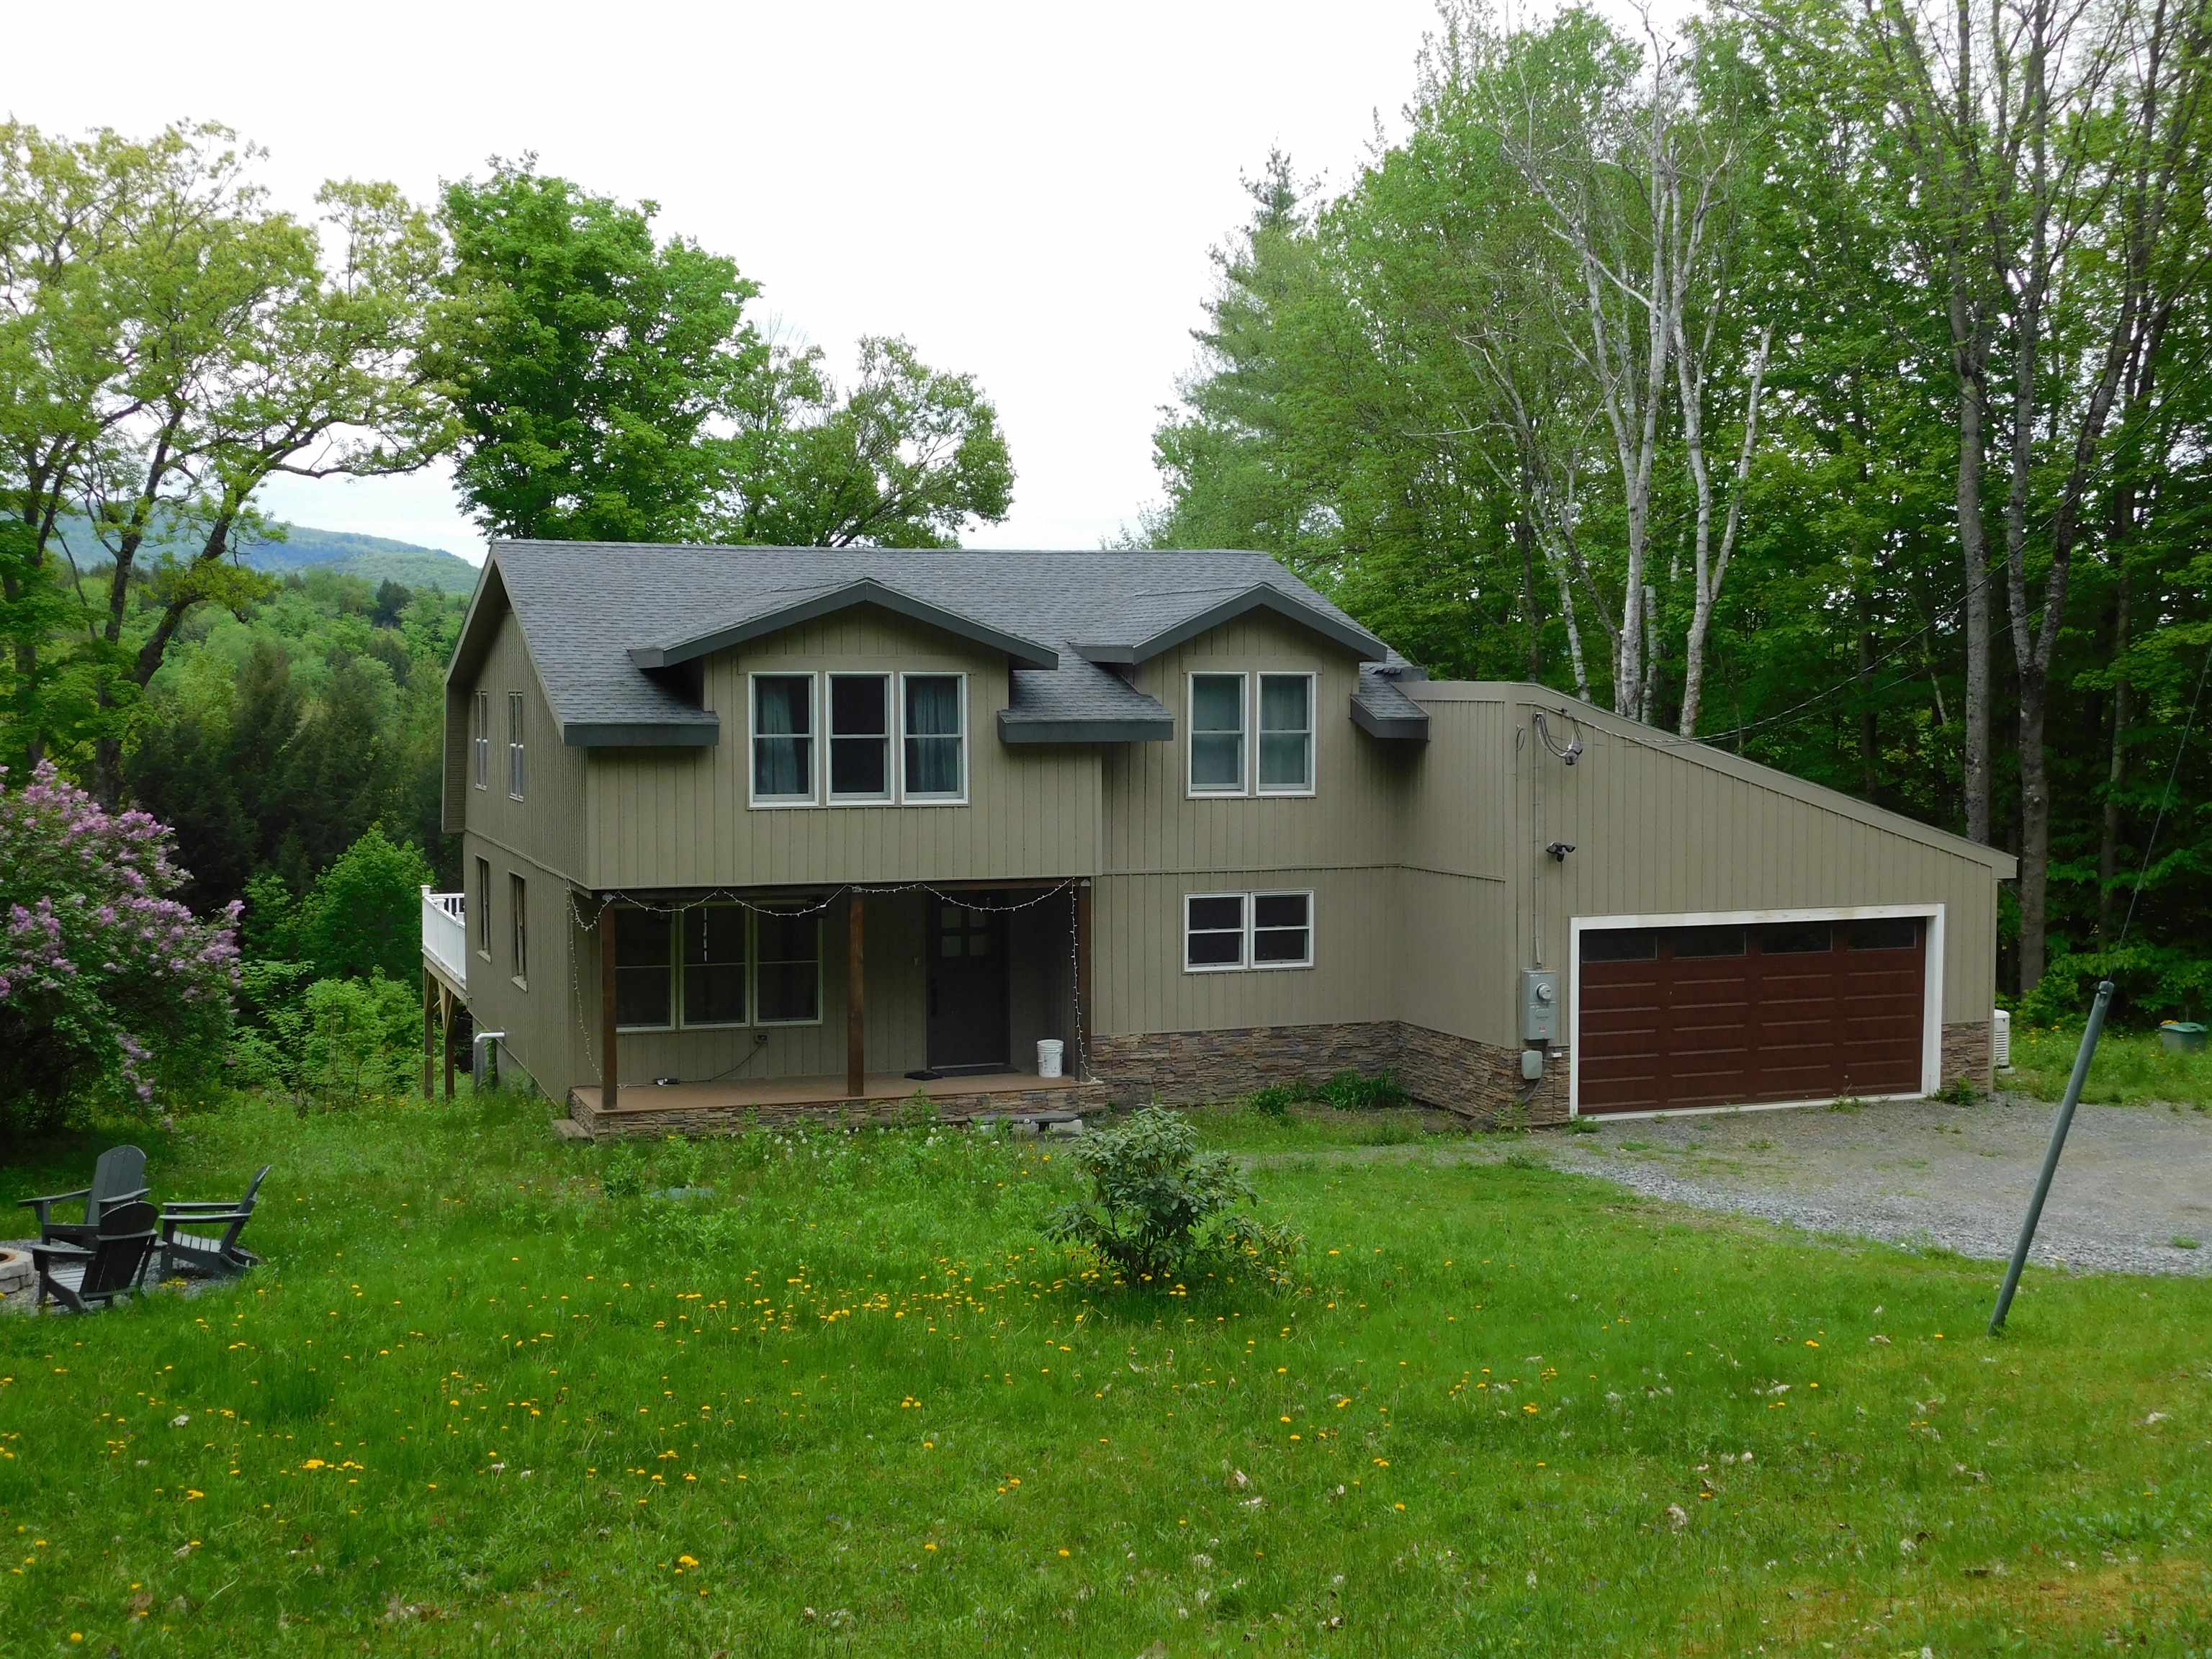 CHESTER VT Homes for sale